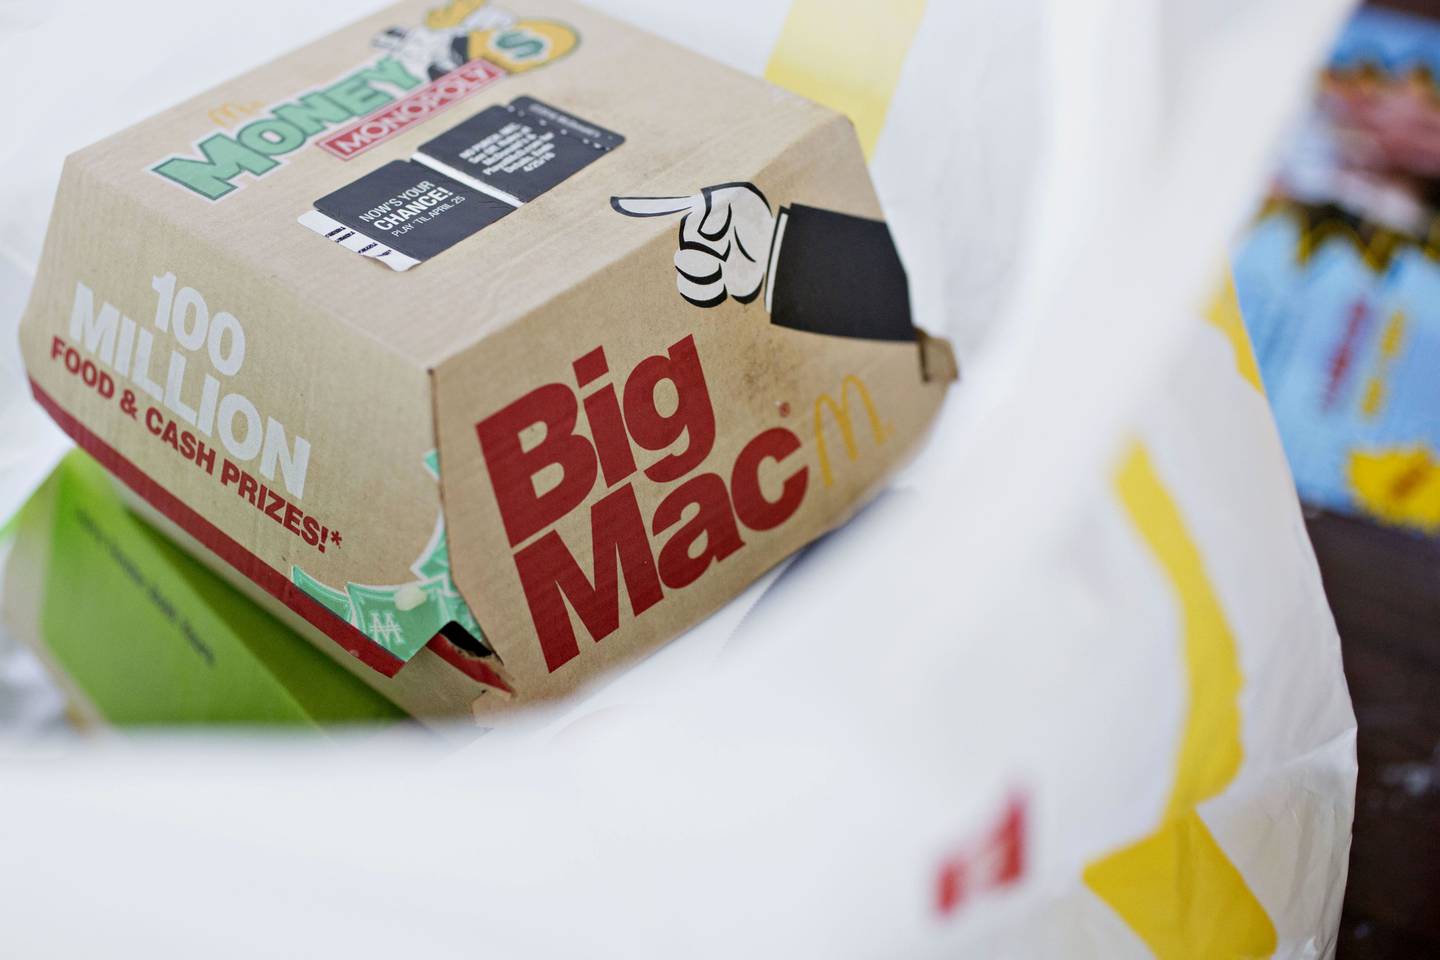 A McDonald's Corp. Big Mac hamburger is arranged for a photograph in Tiskilwa, Illinois, U.S., on Friday, April 15, 2016. McDonald's Corp. is expected to report quarterly earnings on April 22. Photographer: Daniel Acker/Bloomberg